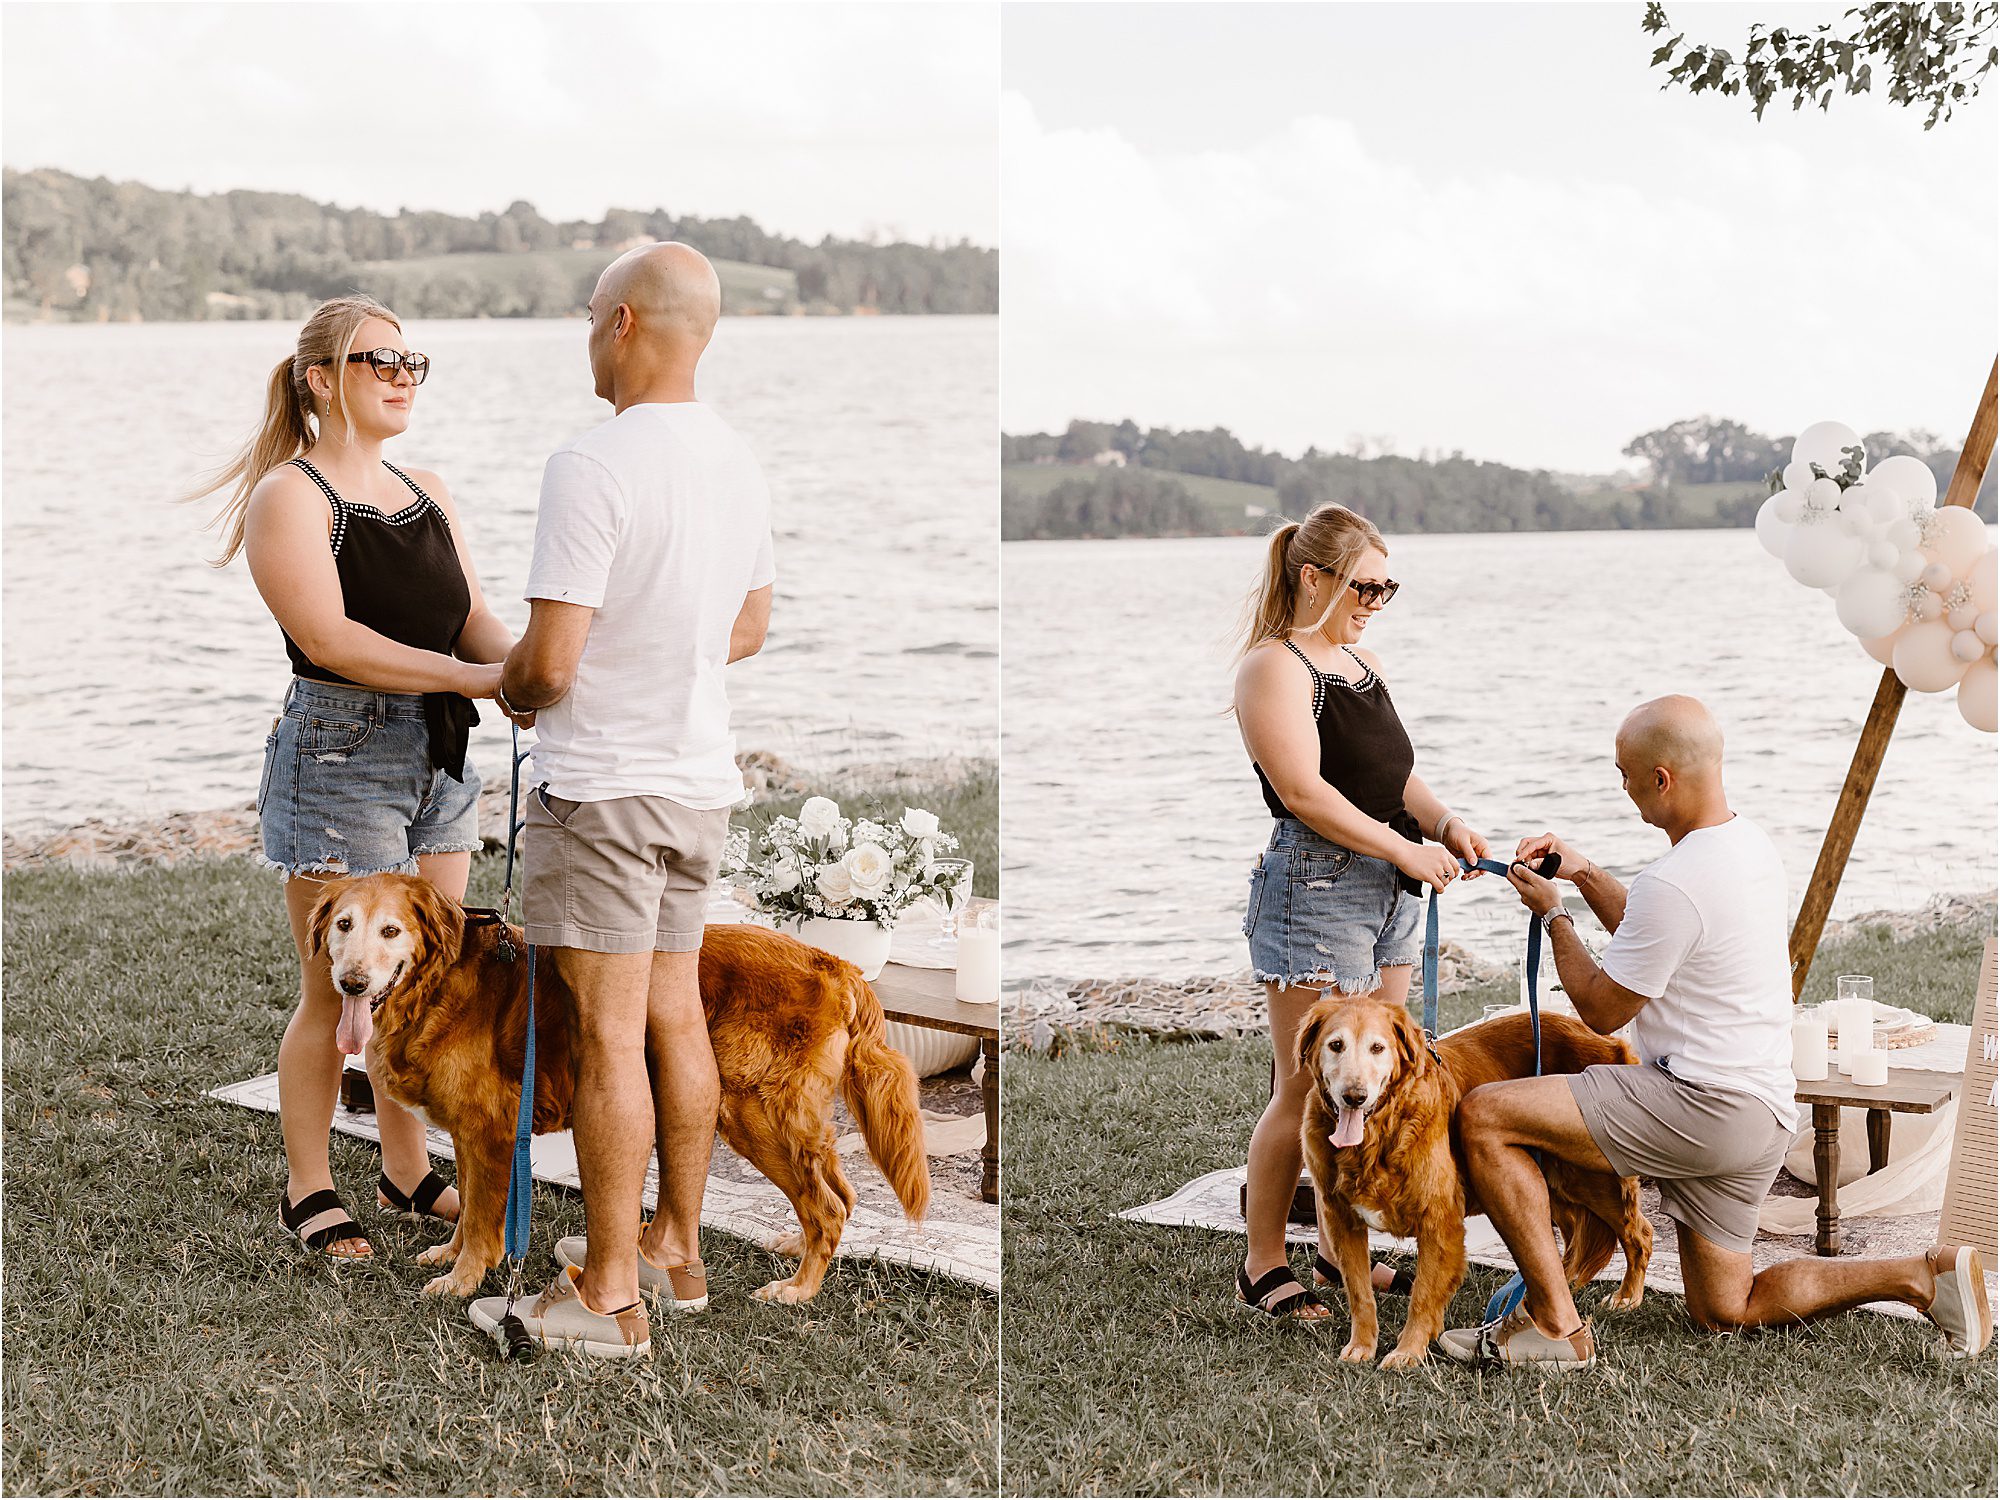 simple proposal idea from a photographer's perspective